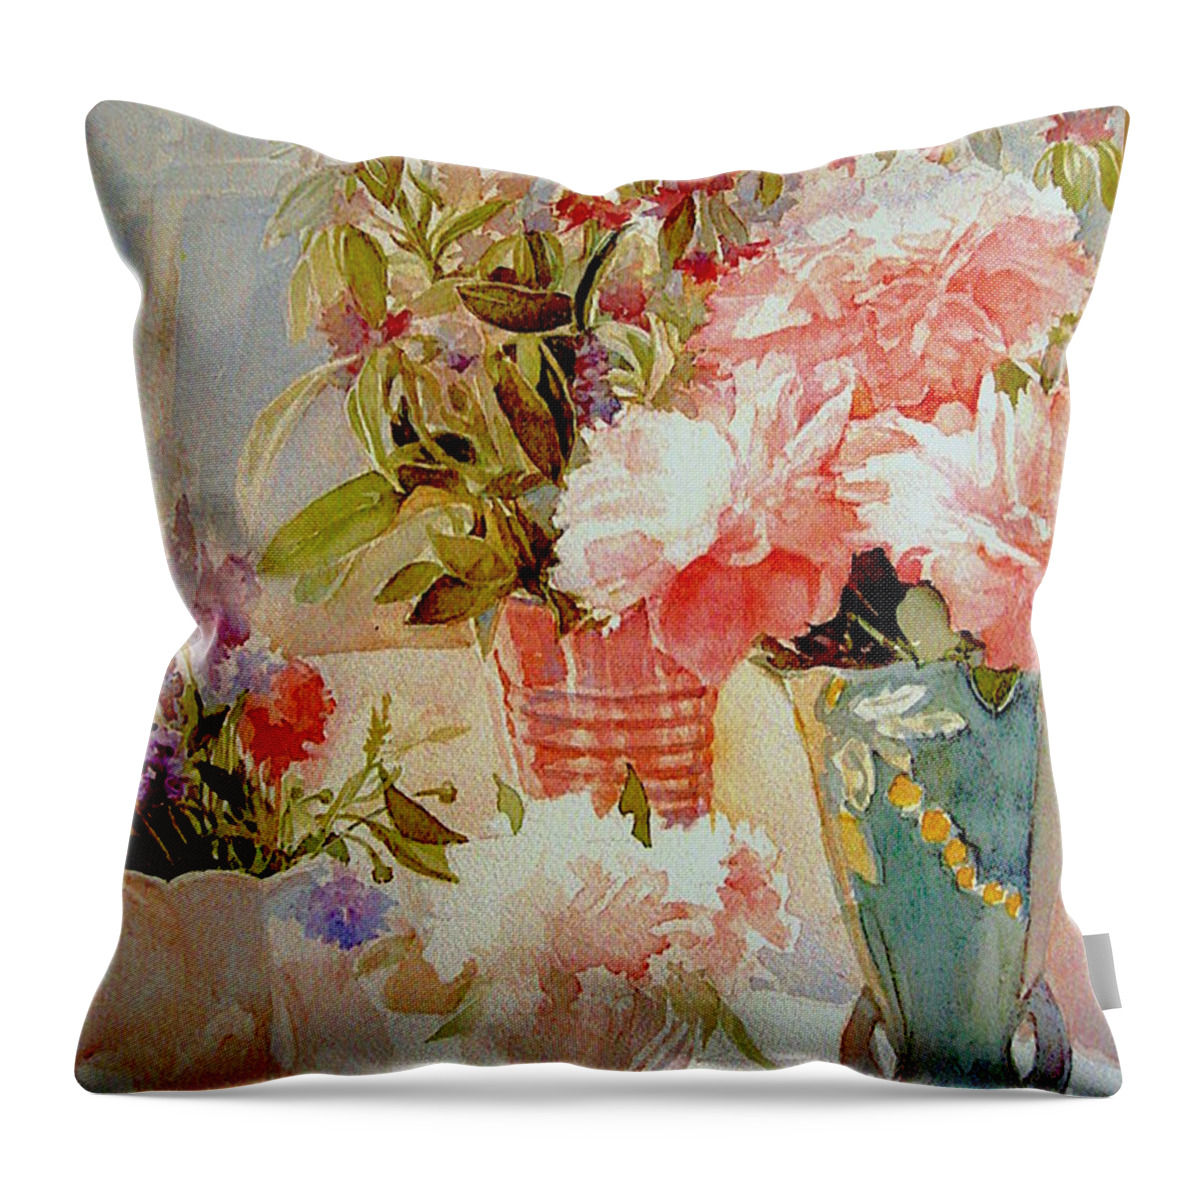 Vase Throw Pillow featuring the painting Les Grands Vases by Francoise Chauray